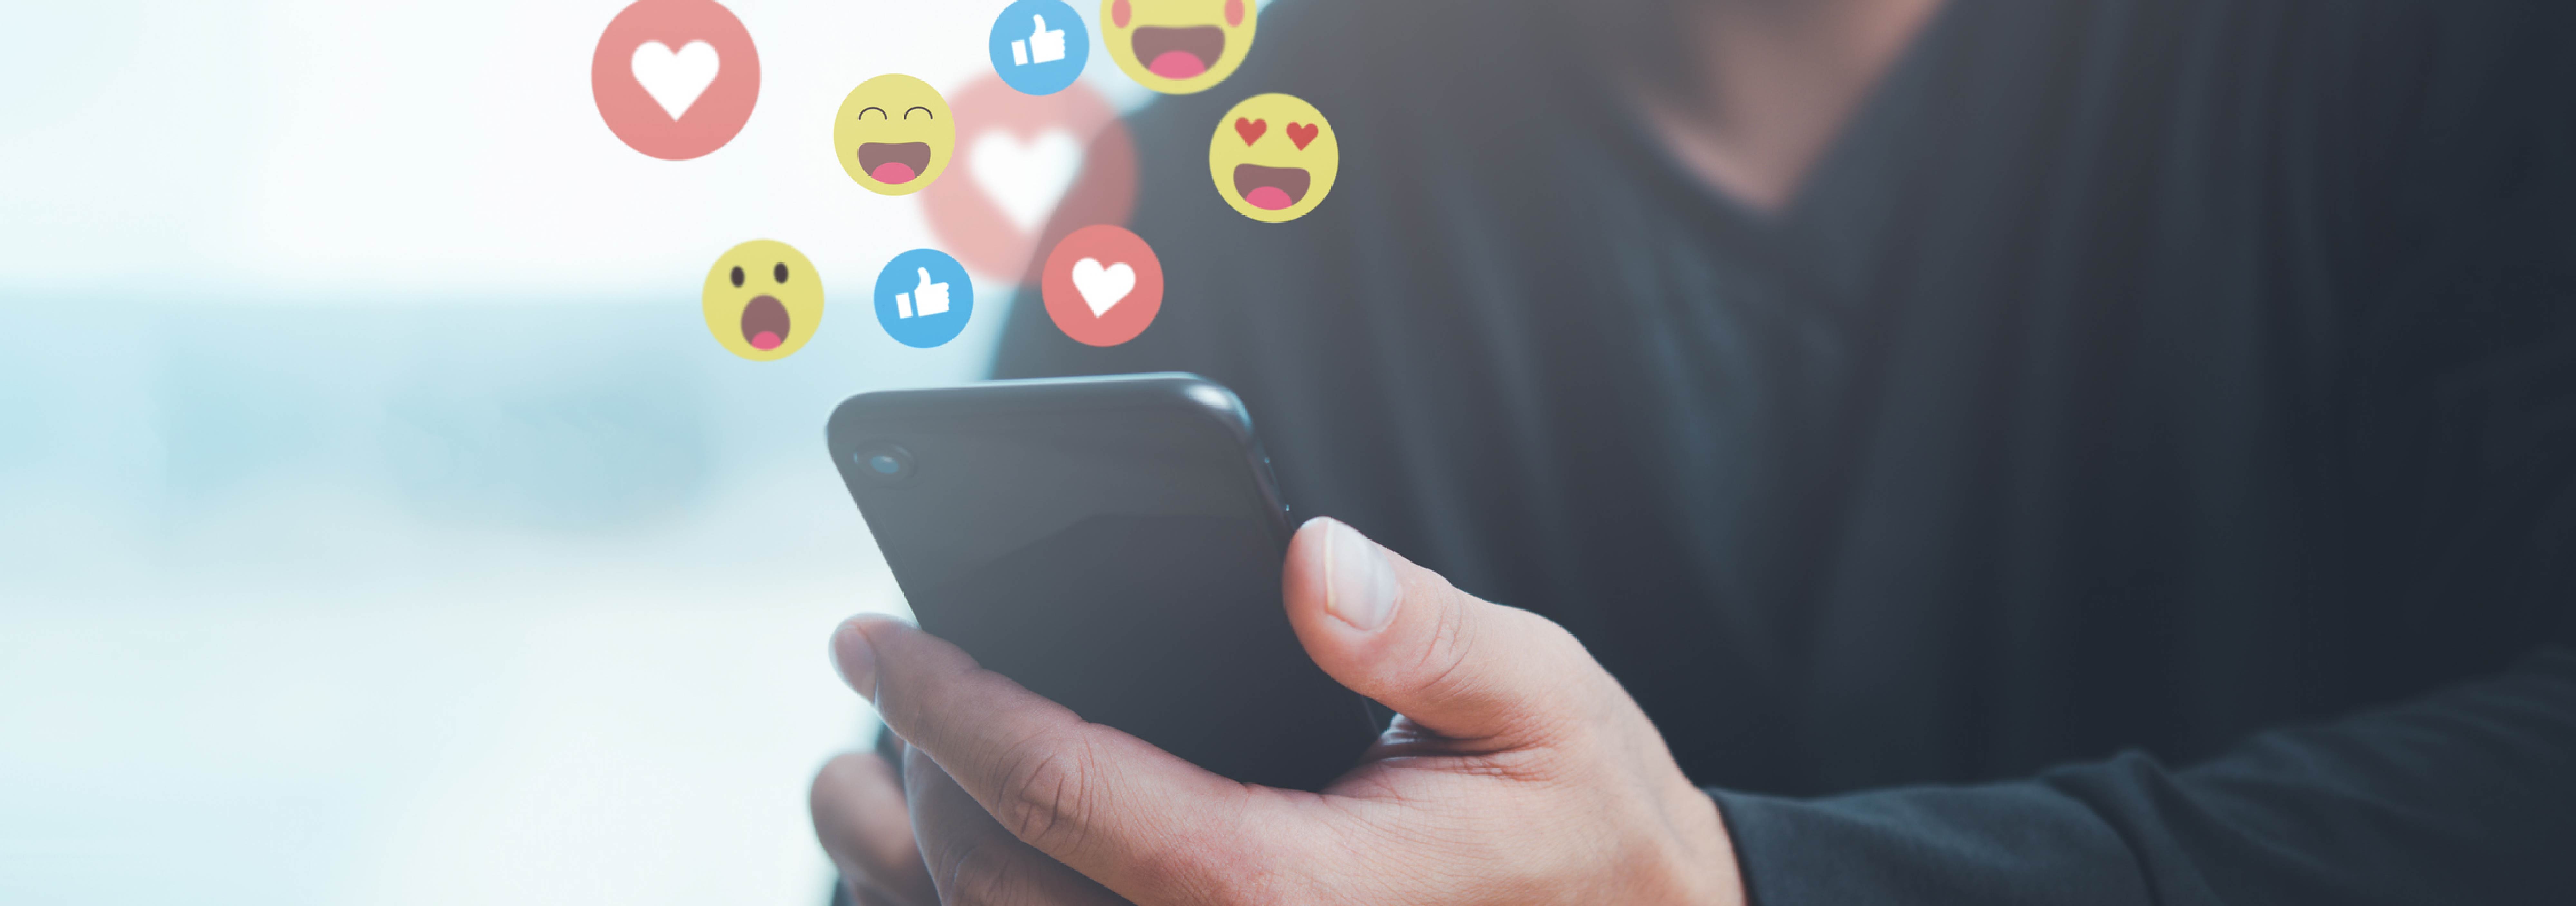 social media reactions floating above phone